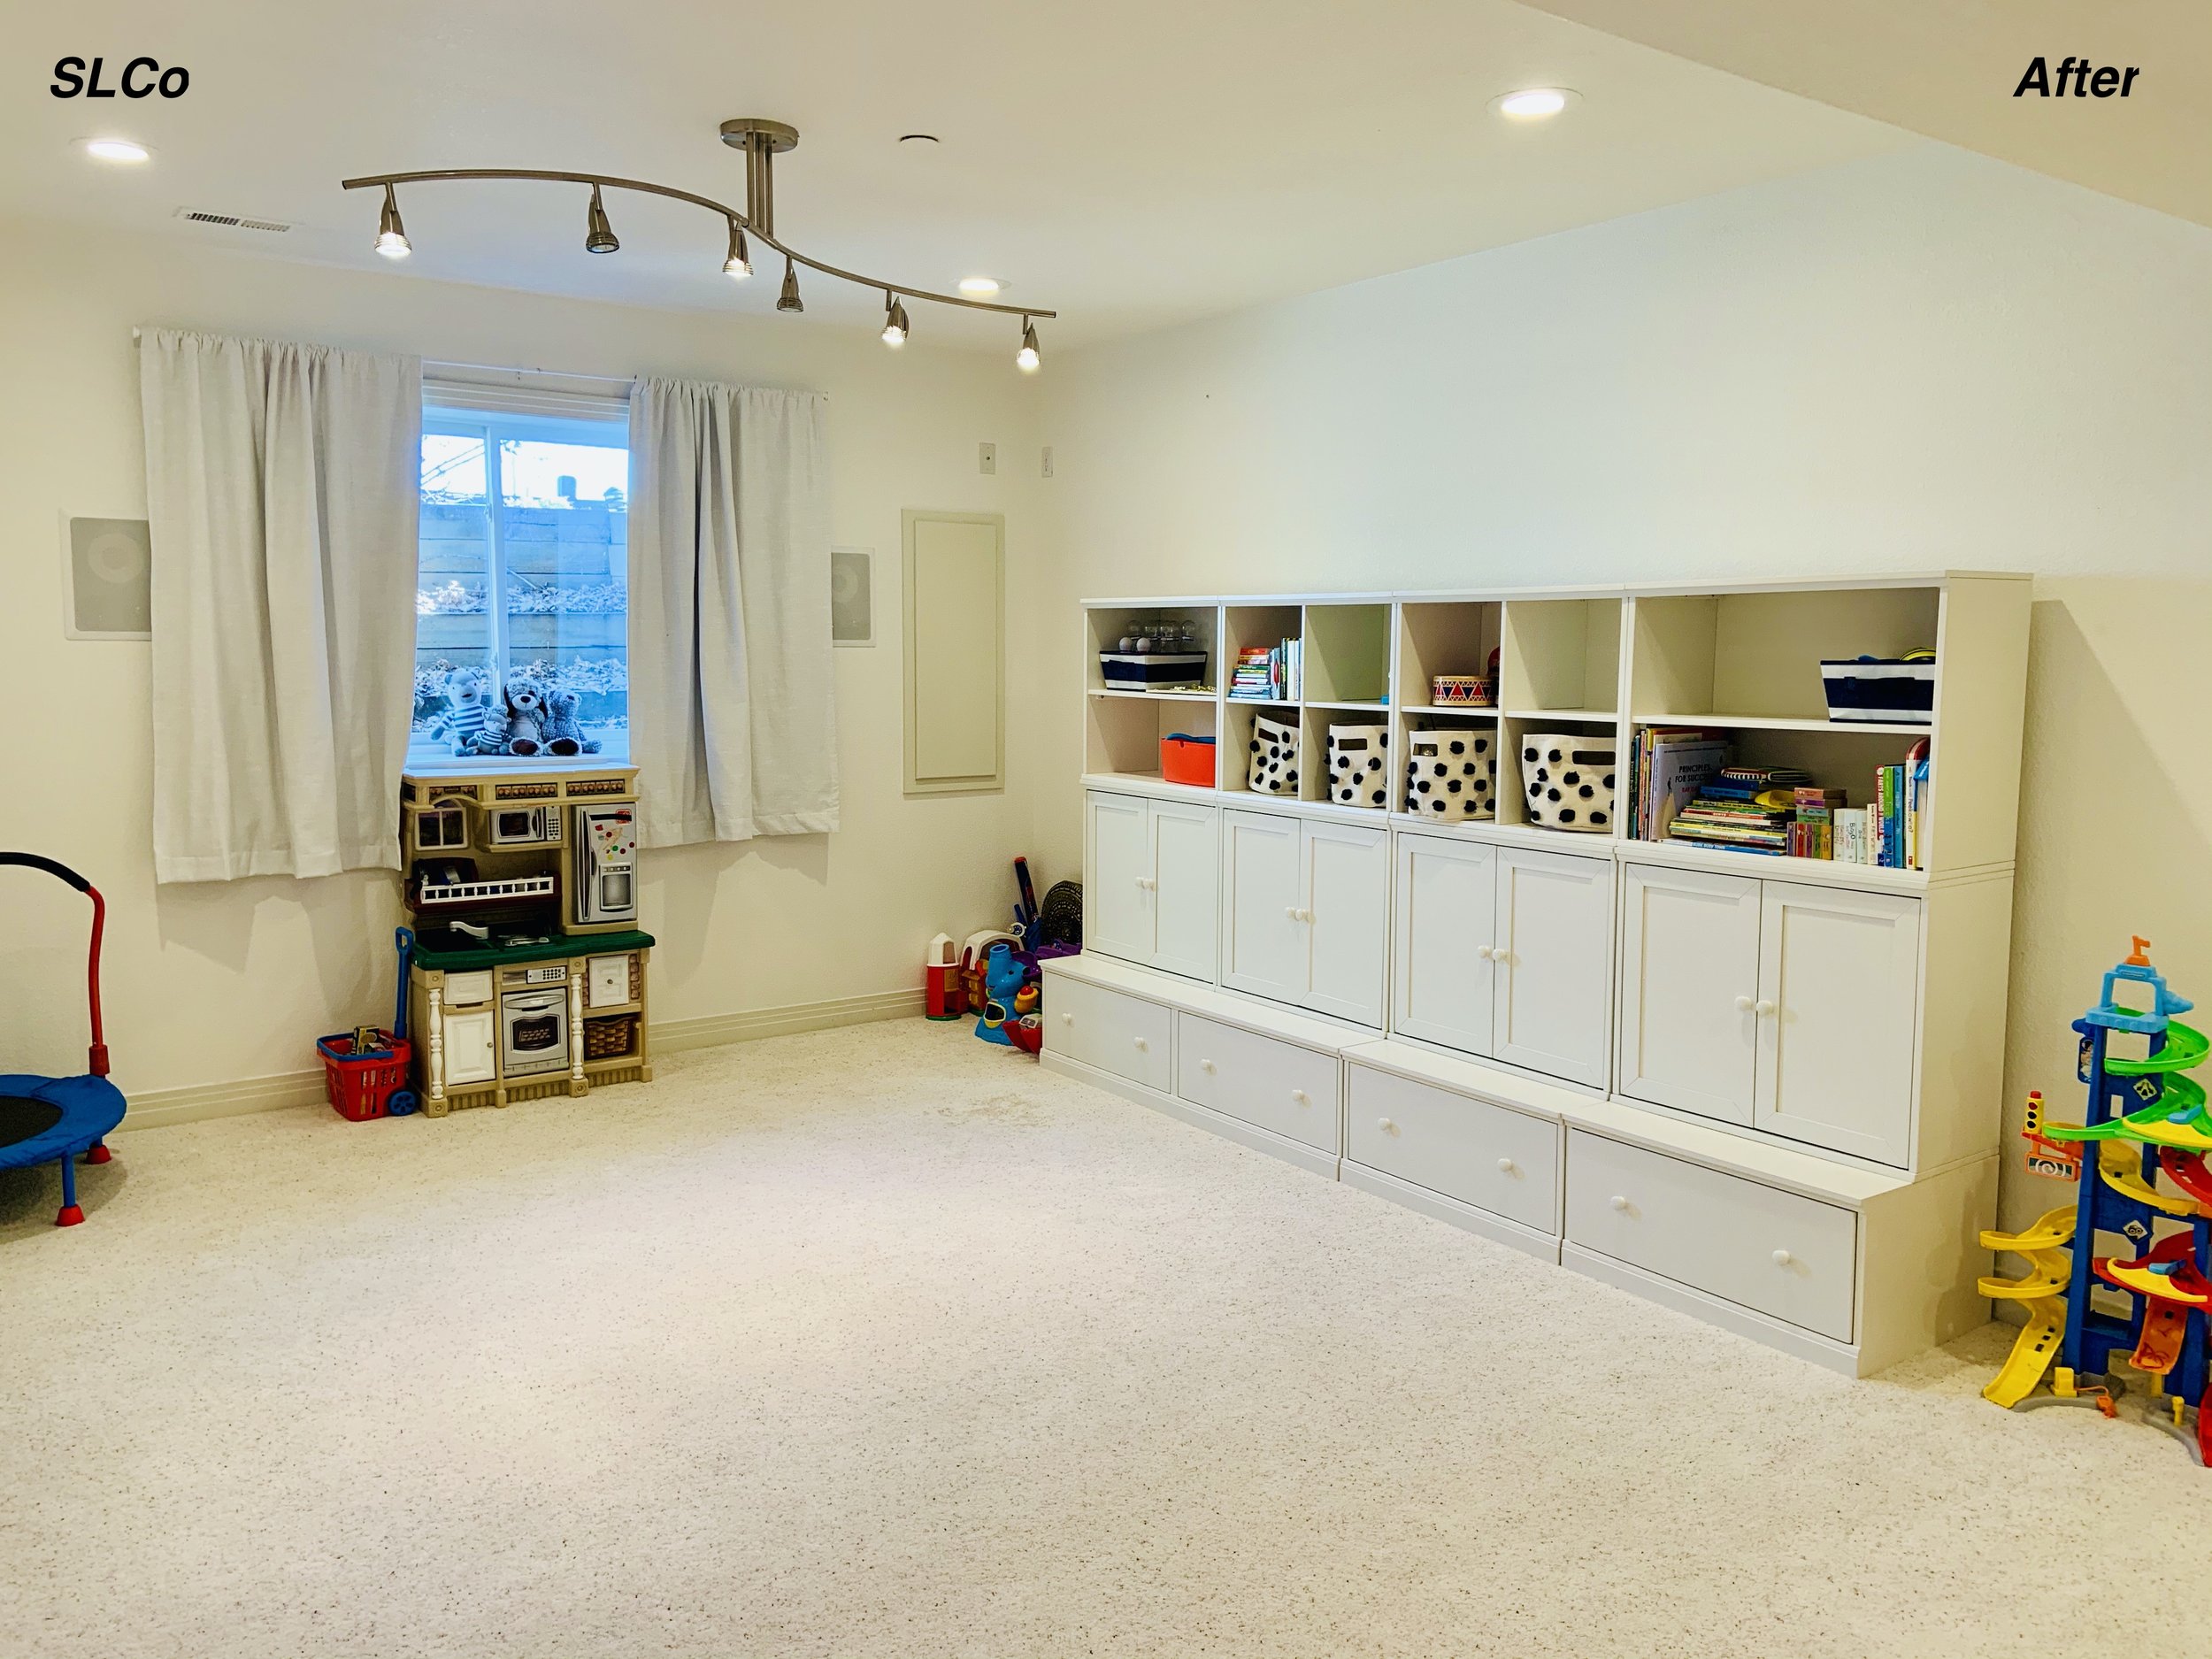 After photo of large playroom with carpet clean, nothing on the floor, and items in the cabinets and shelves.